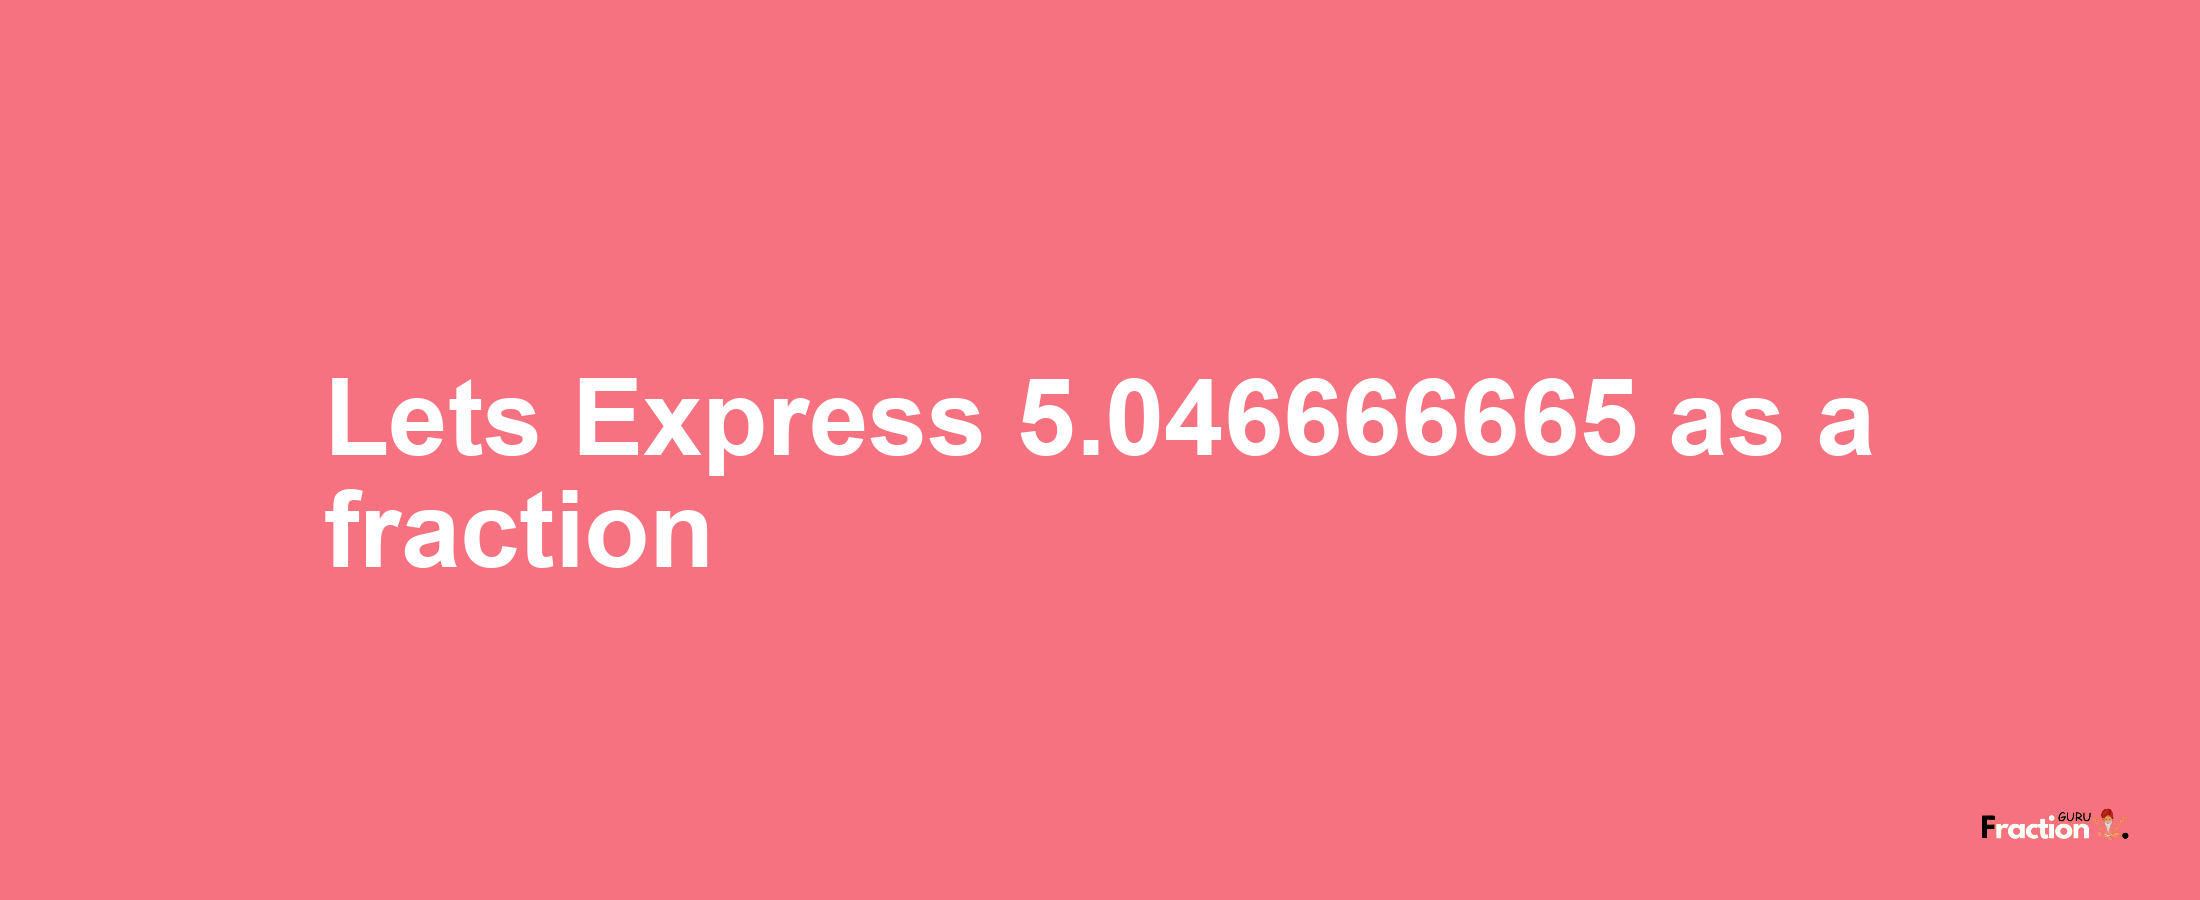 Lets Express 5.046666665 as afraction